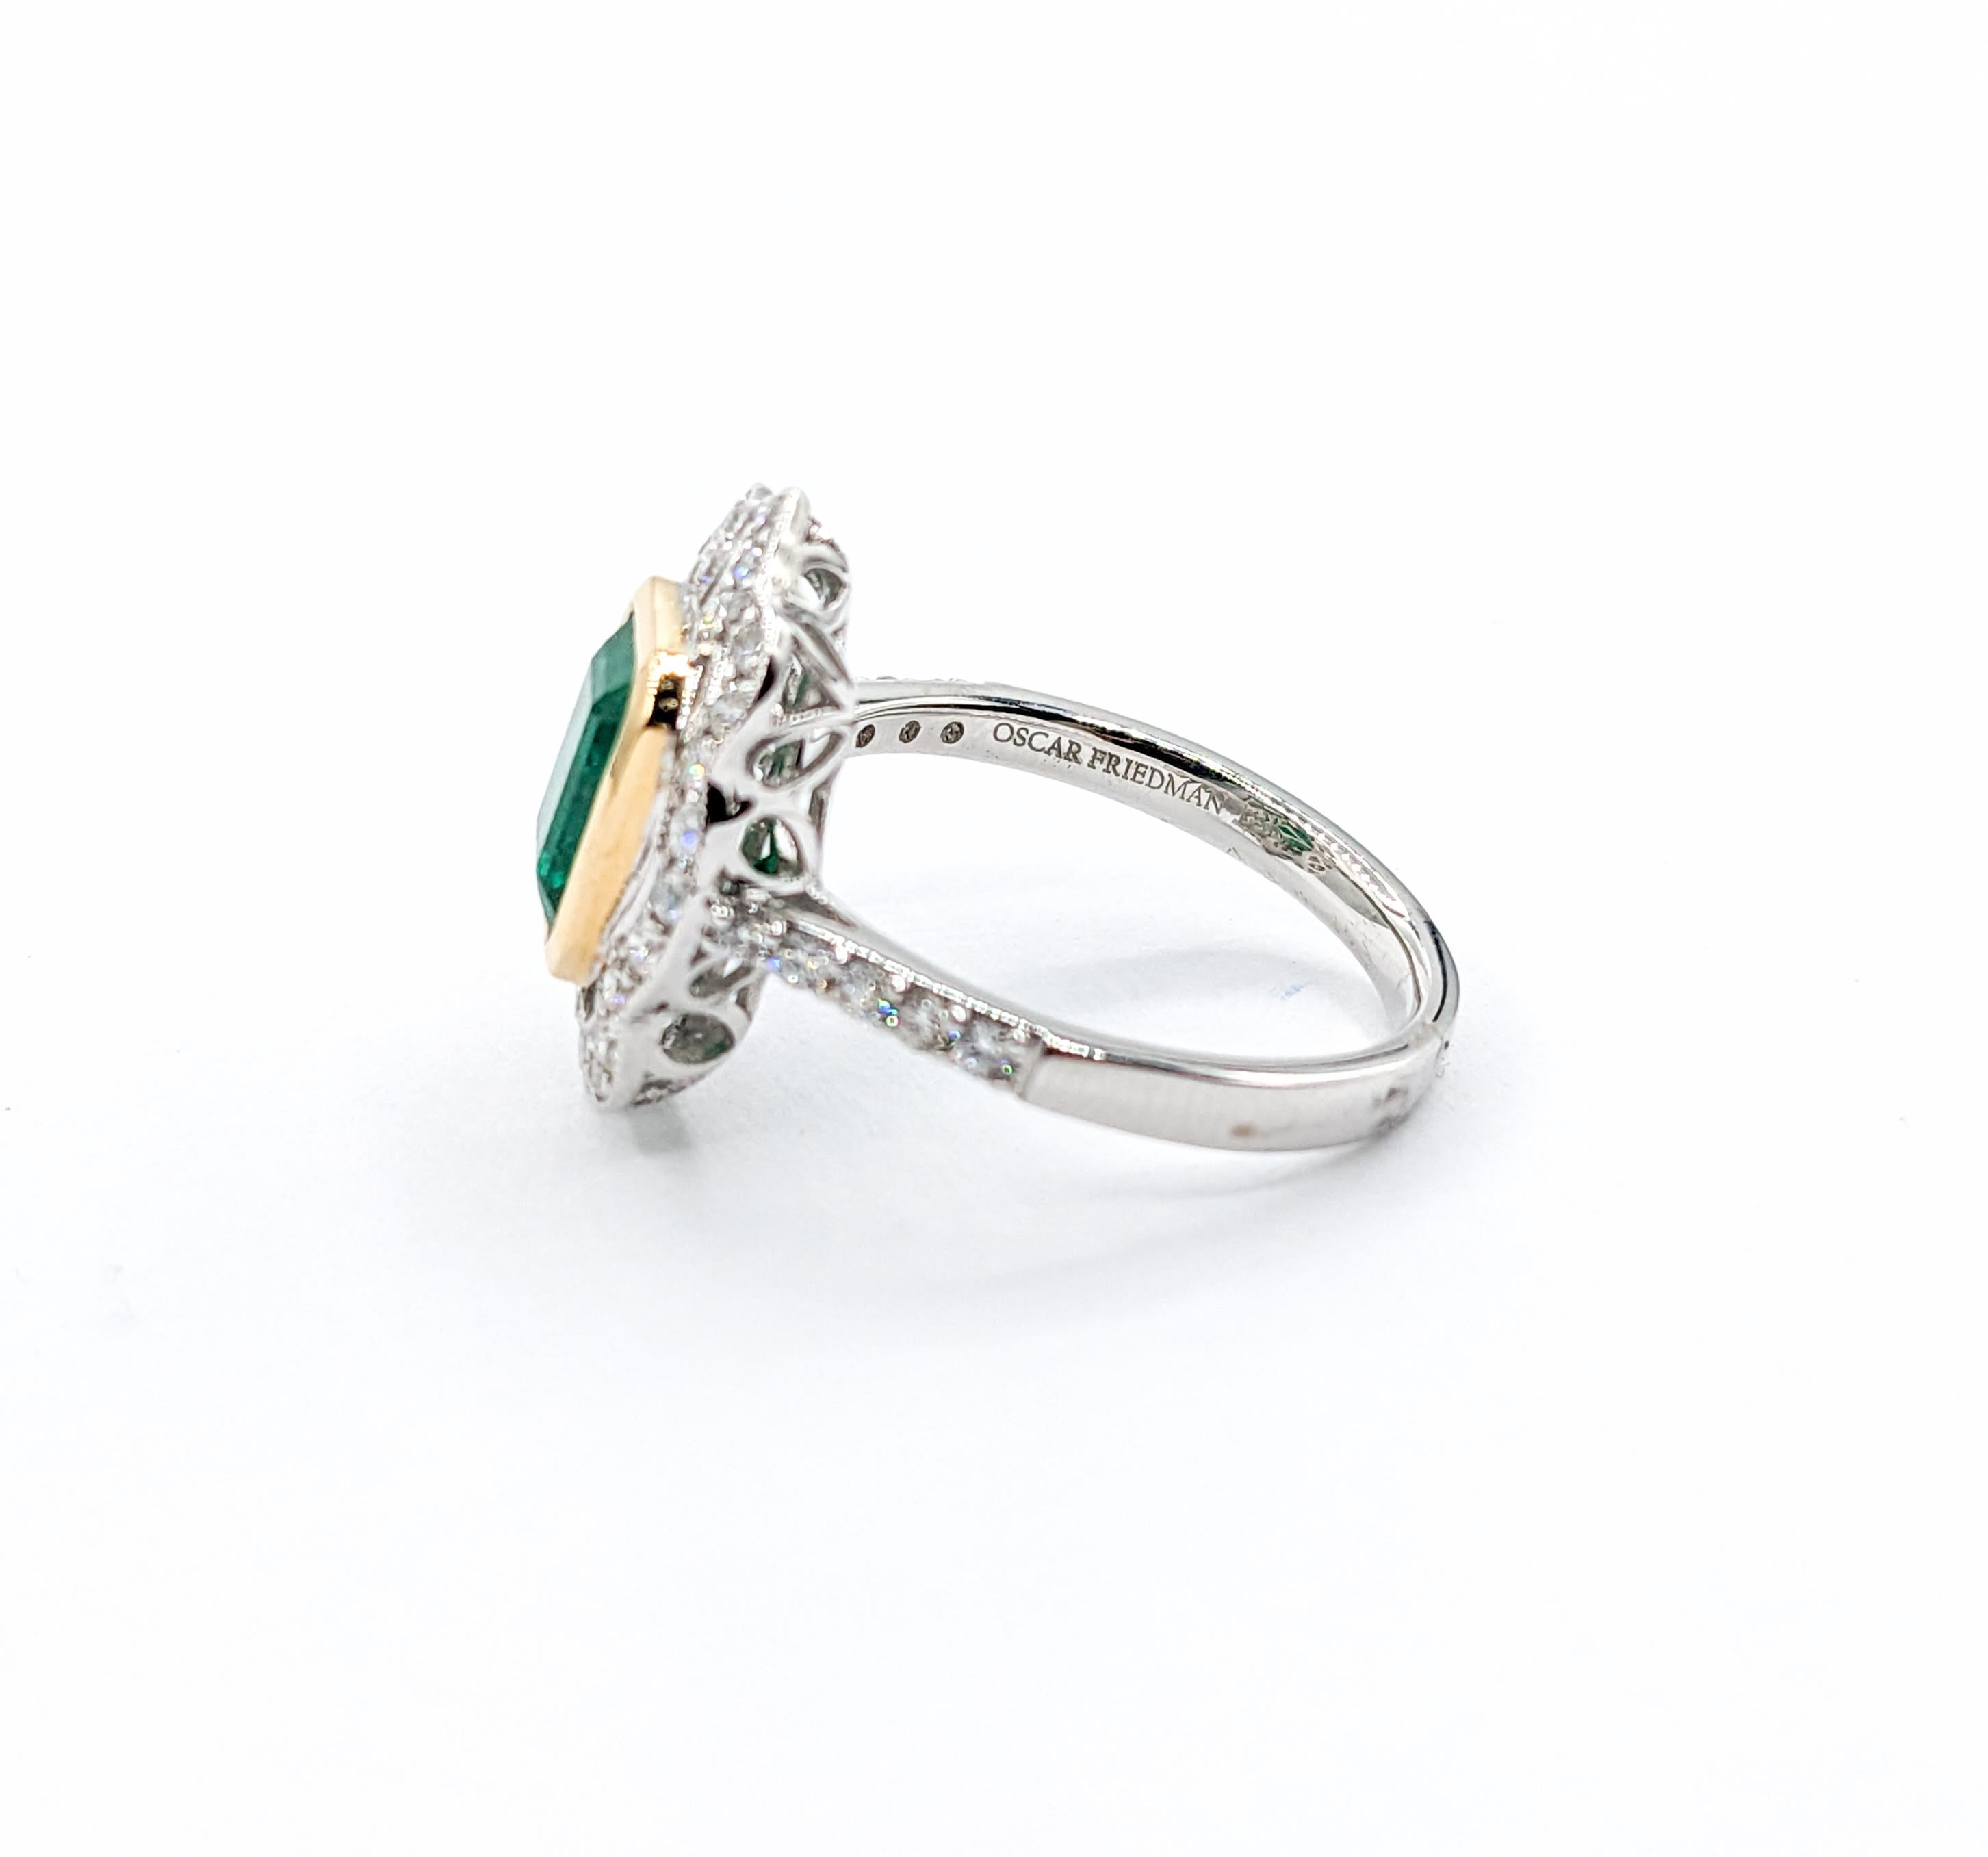 Two-Tone Emerald & Diamond Cocktail Ring For Sale 2